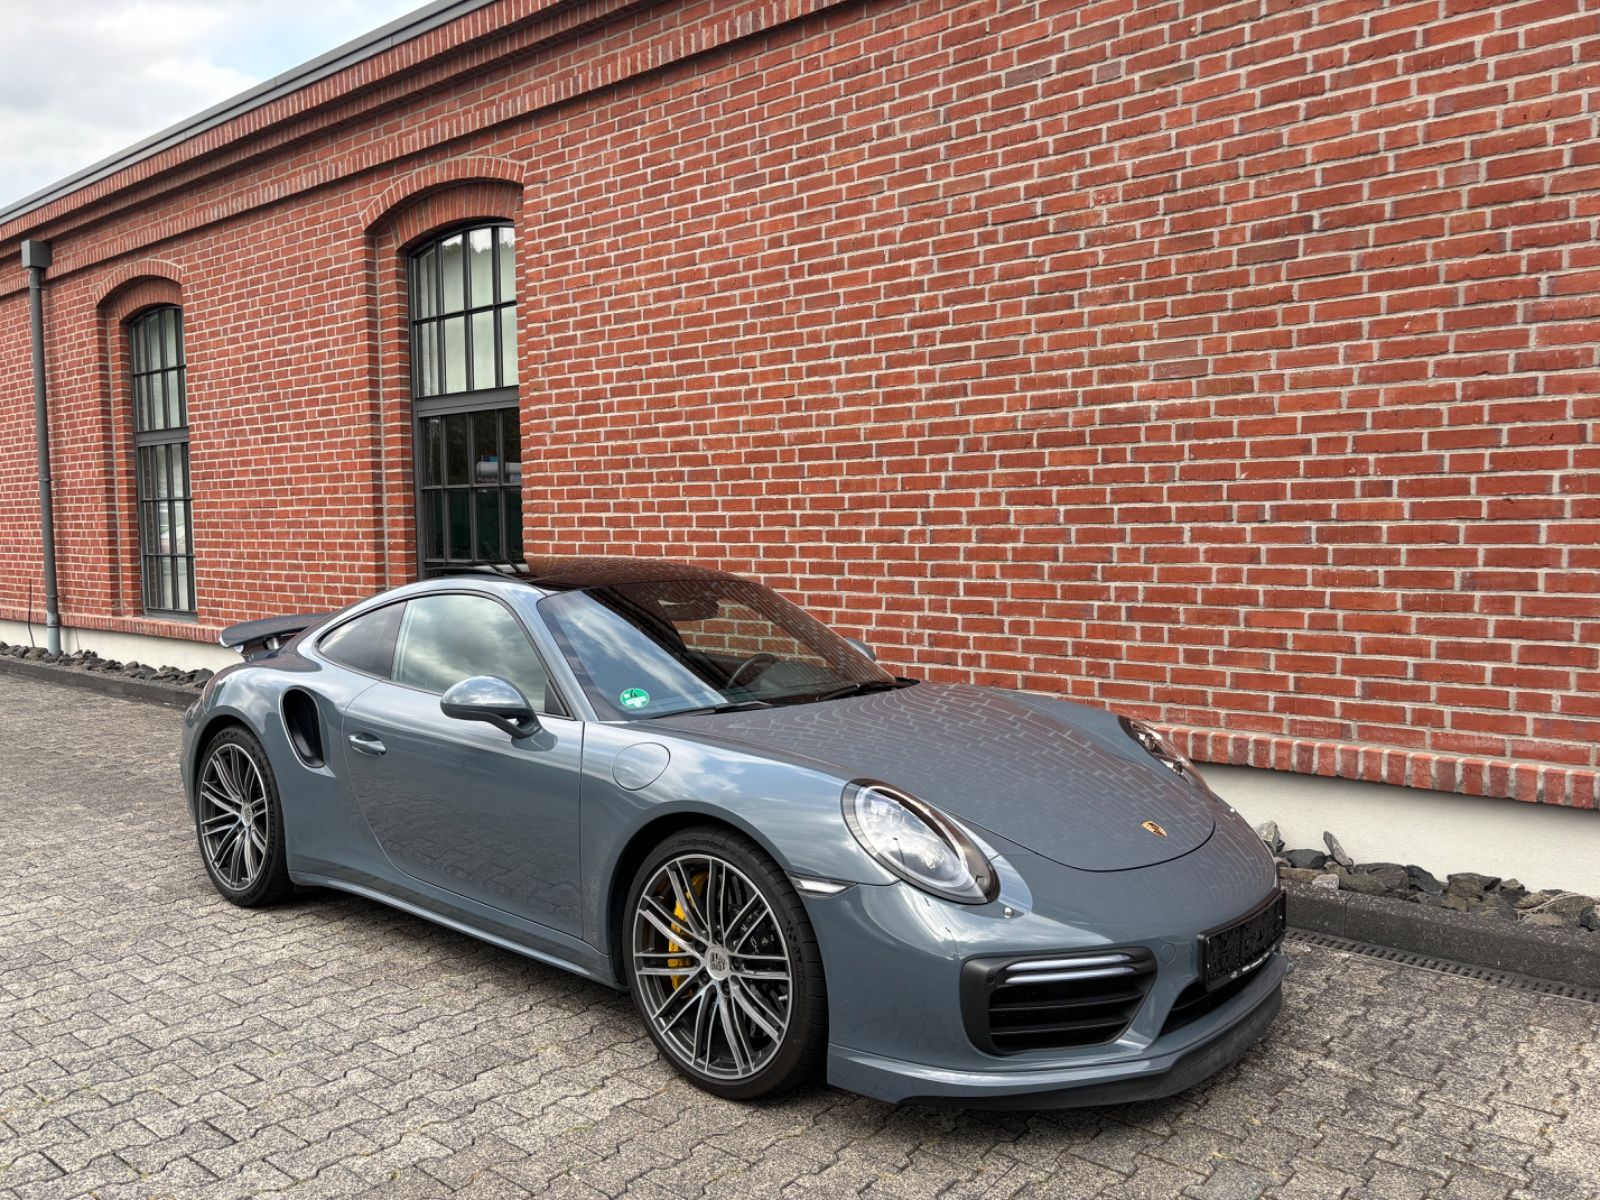 Porsche 991 991.2 Turbo S Coupe Approved Kamera Schiebedach